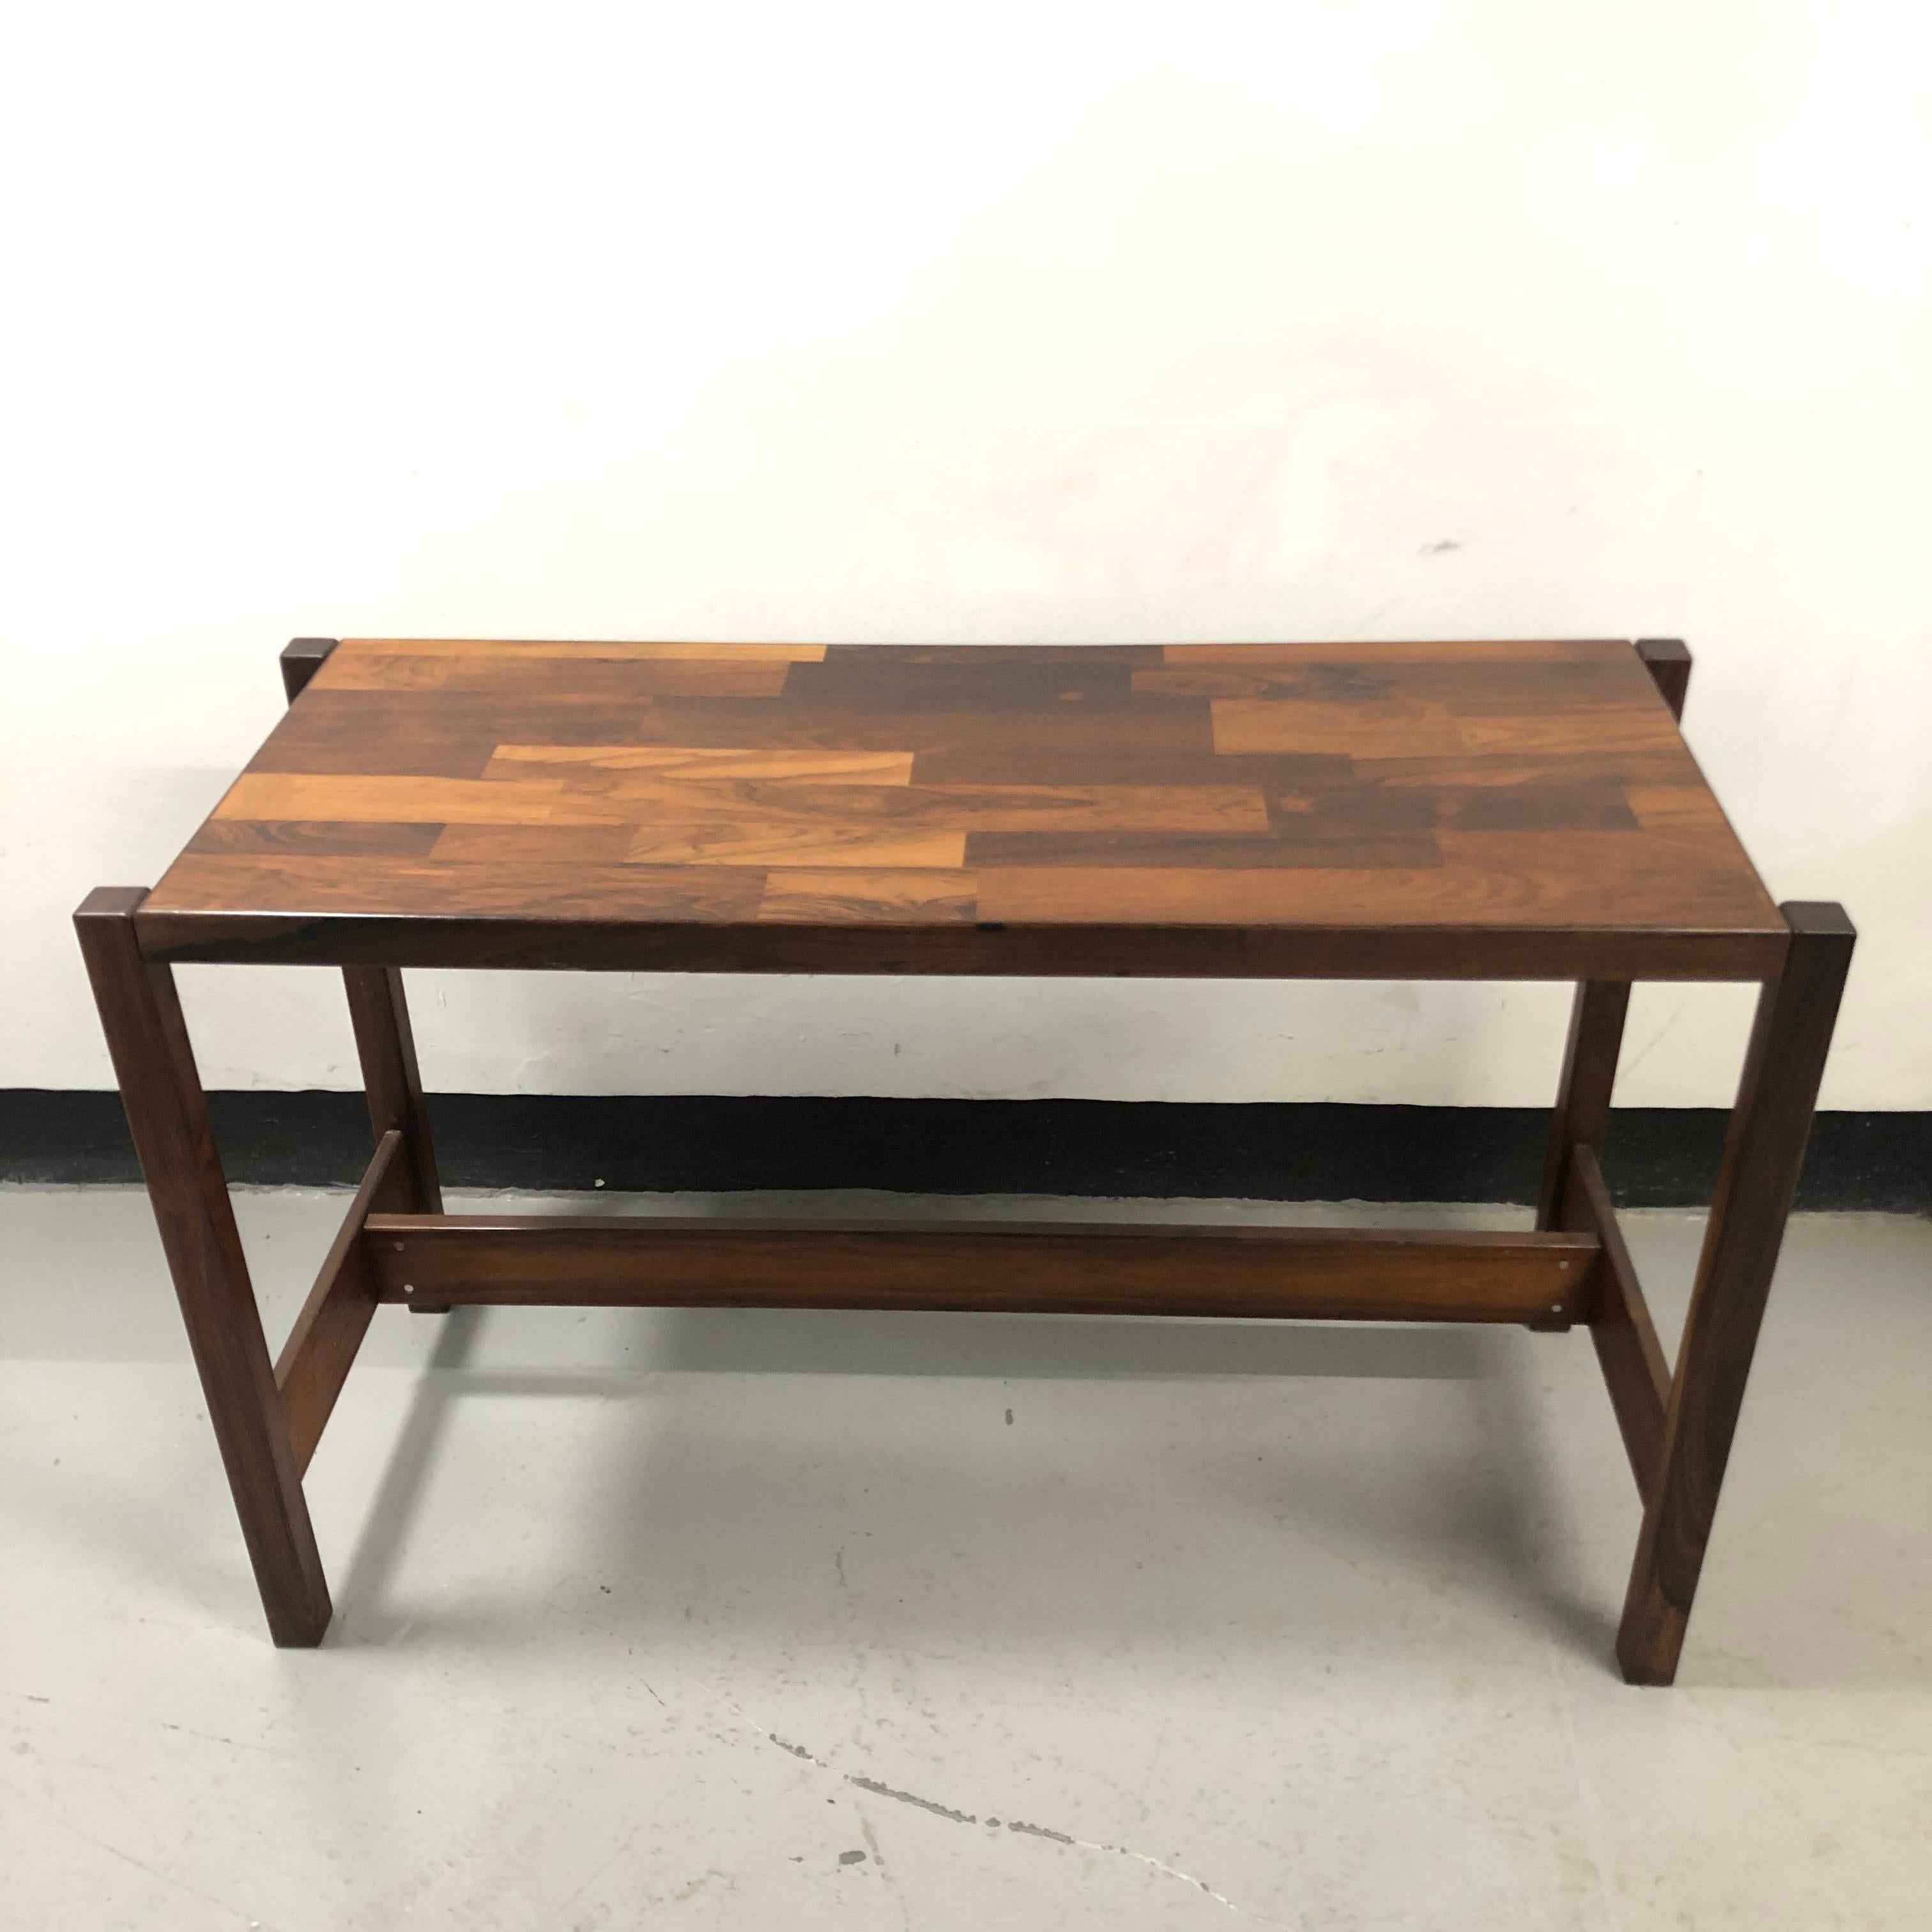 An original 1960s L'atelier console table designed by Jorge Zalszupin, Brazil.

This versatile console table also works as a small desk.
It has his iconic patchwork pattern Imbuia wood top with steel fixtures that give this console a feeling of